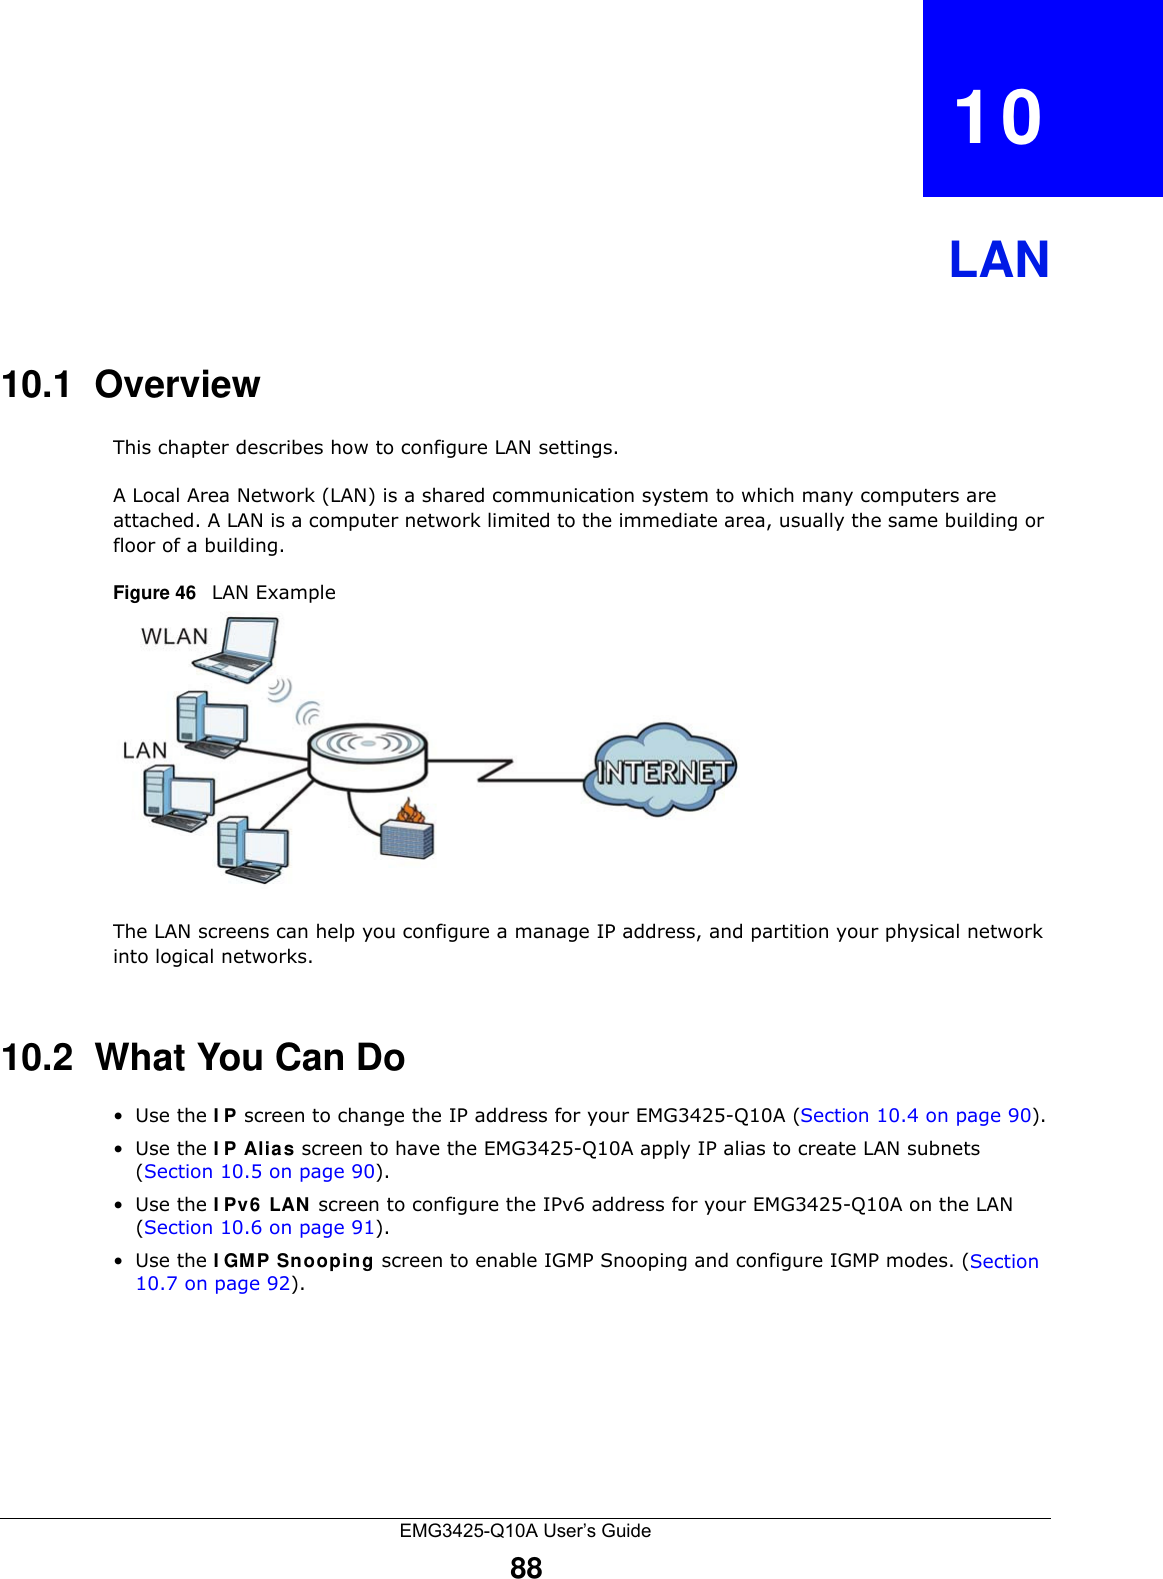 EMG3425-Q10A User’s Guide88CHAPTER   10LAN10.1  OverviewThis chapter describes how to configure LAN settings.A Local Area Network (LAN) is a shared communication system to which many computers are attached. A LAN is a computer network limited to the immediate area, usually the same building or floor of a building. Figure 46   LAN ExampleThe LAN screens can help you configure a manage IP address, and partition your physical network into logical networks.10.2  What You Can Do•Use the I P screen to change the IP address for your EMG3425-Q10A (Section 10.4 on page 90).•Use the I P Alias screen to have the EMG3425-Q10A apply IP alias to create LAN subnets (Section 10.5 on page 90).•Use the I Pv6  LAN  screen to configure the IPv6 address for your EMG3425-Q10A on the LAN (Section 10.6 on page 91).•Use the I GM P Snooping screen to enable IGMP Snooping and configure IGMP modes. (Section 10.7 on page 92).